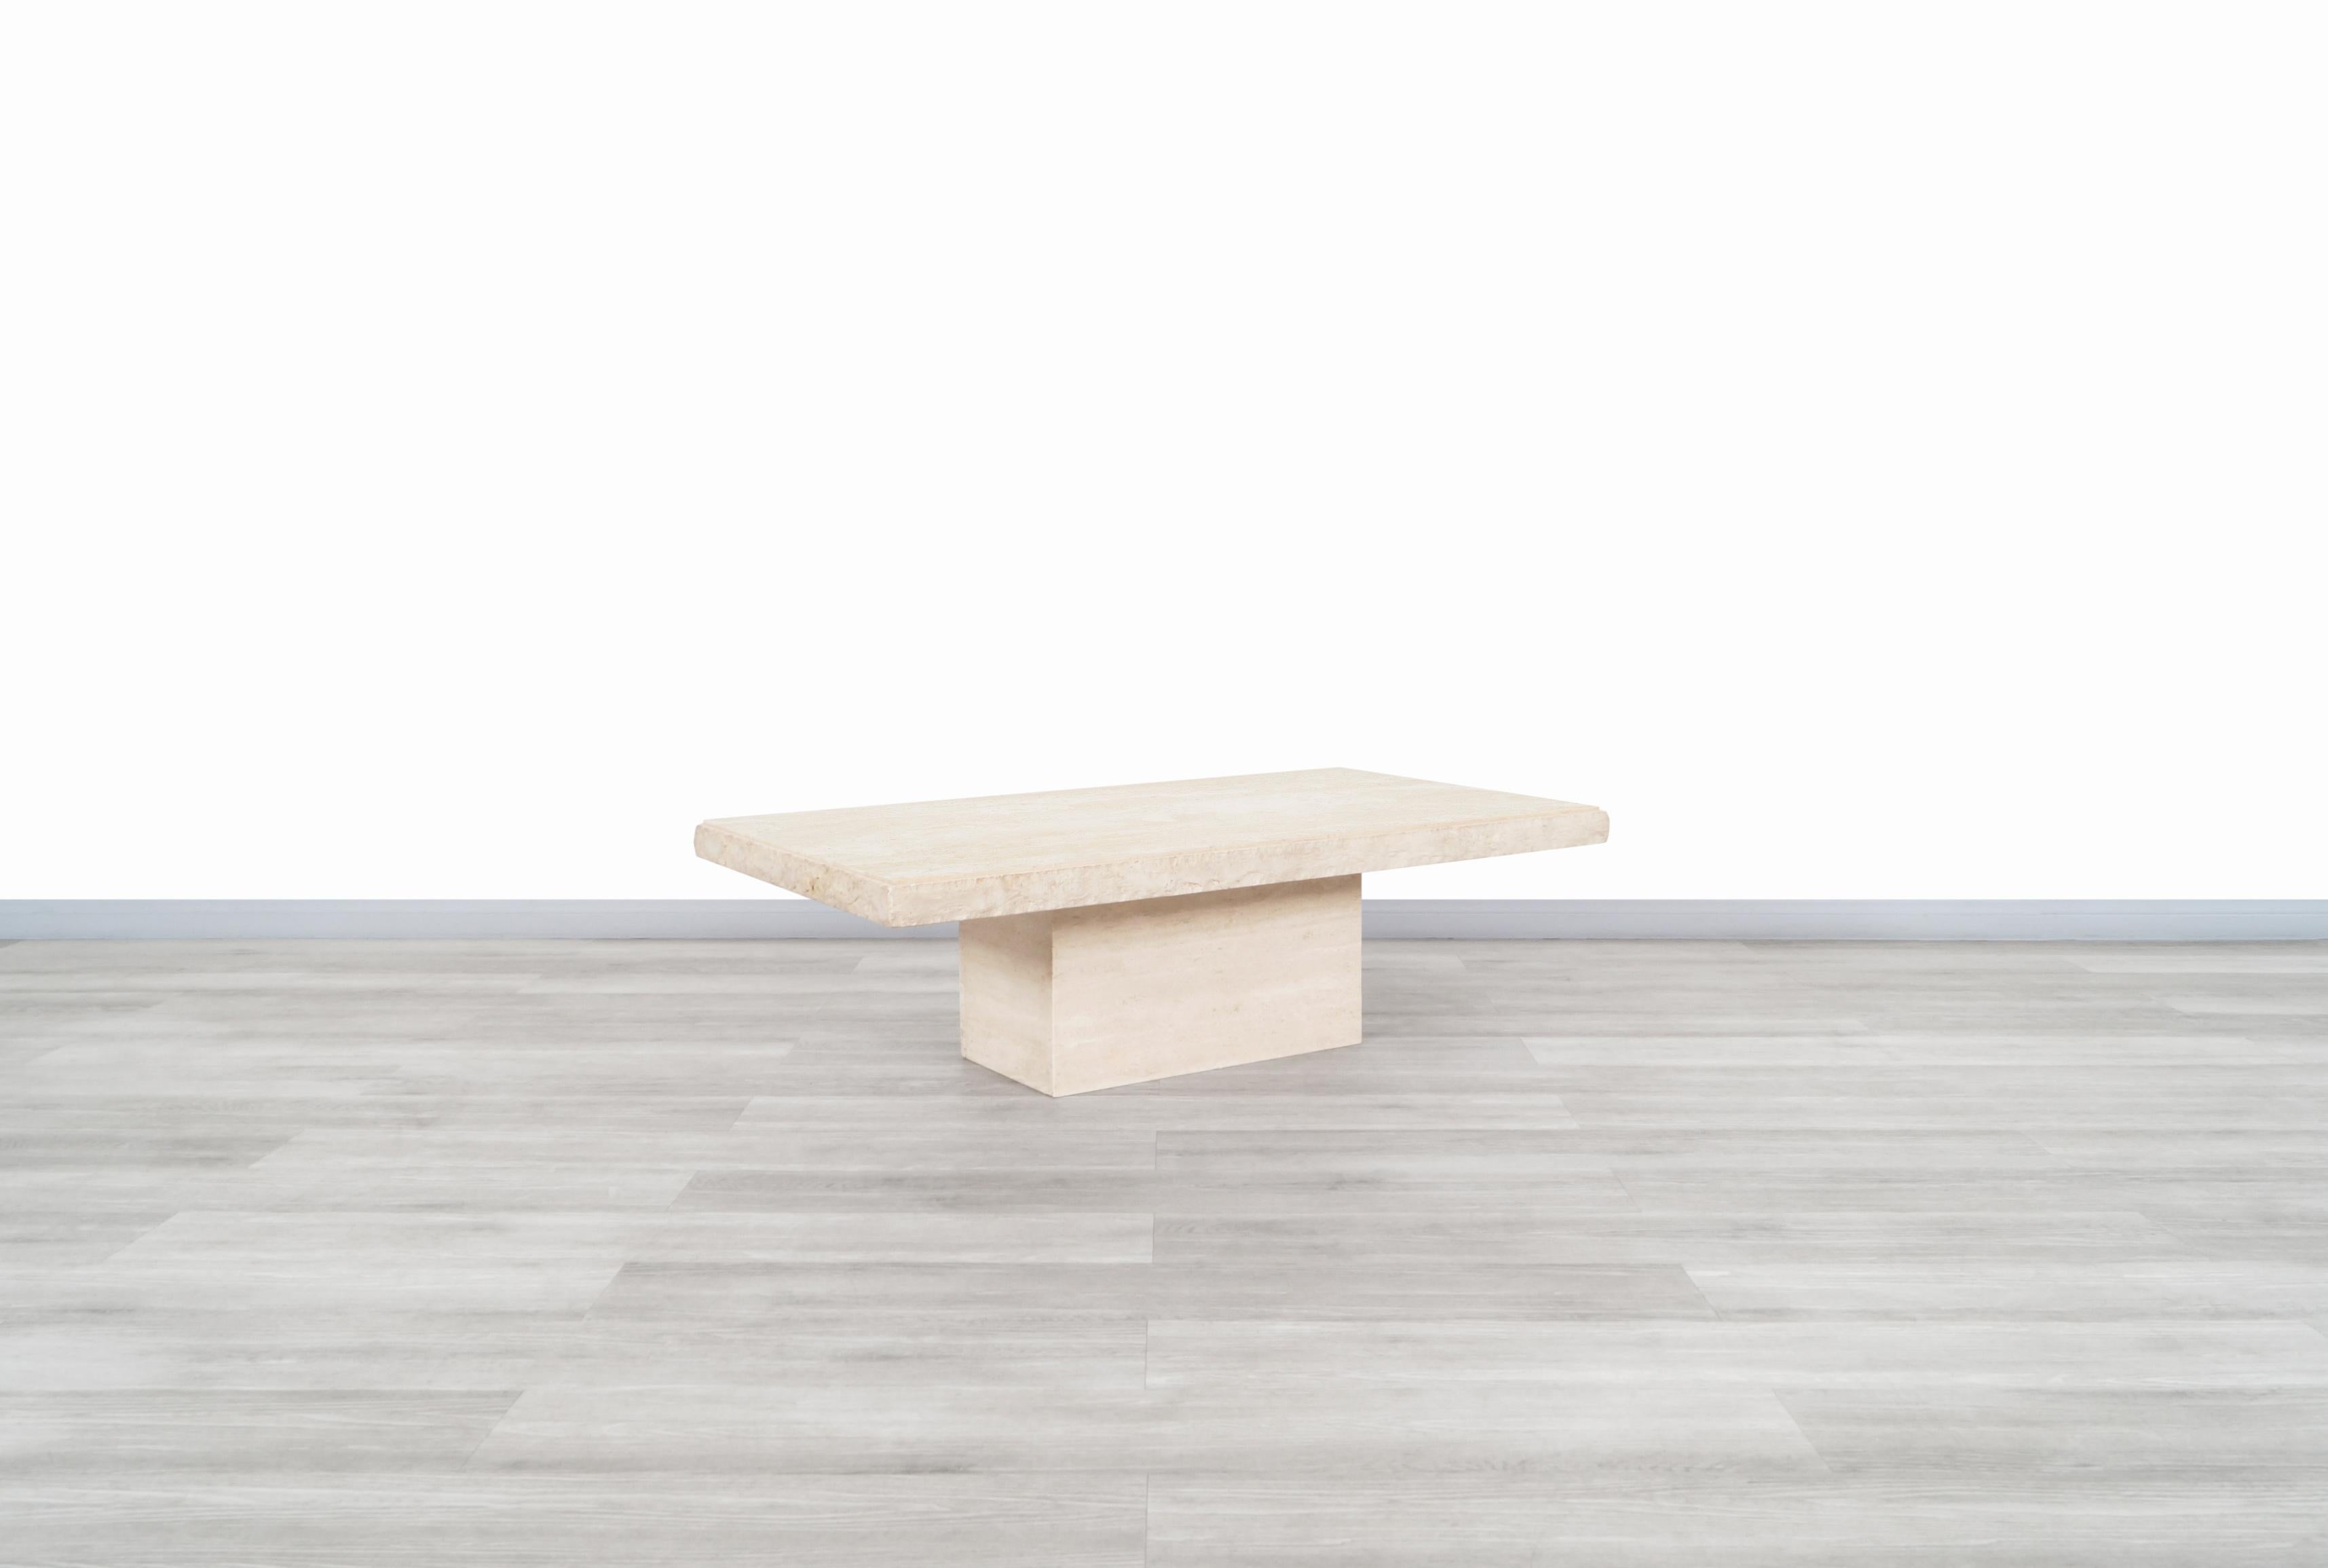 Fantastic vintage Italian modernist travertine coffee table designed and manufactured in Italy, circa 1970s. The combination of the natural minerals that make up the travertine stone flows beautifully through the entire table. The tables feature a